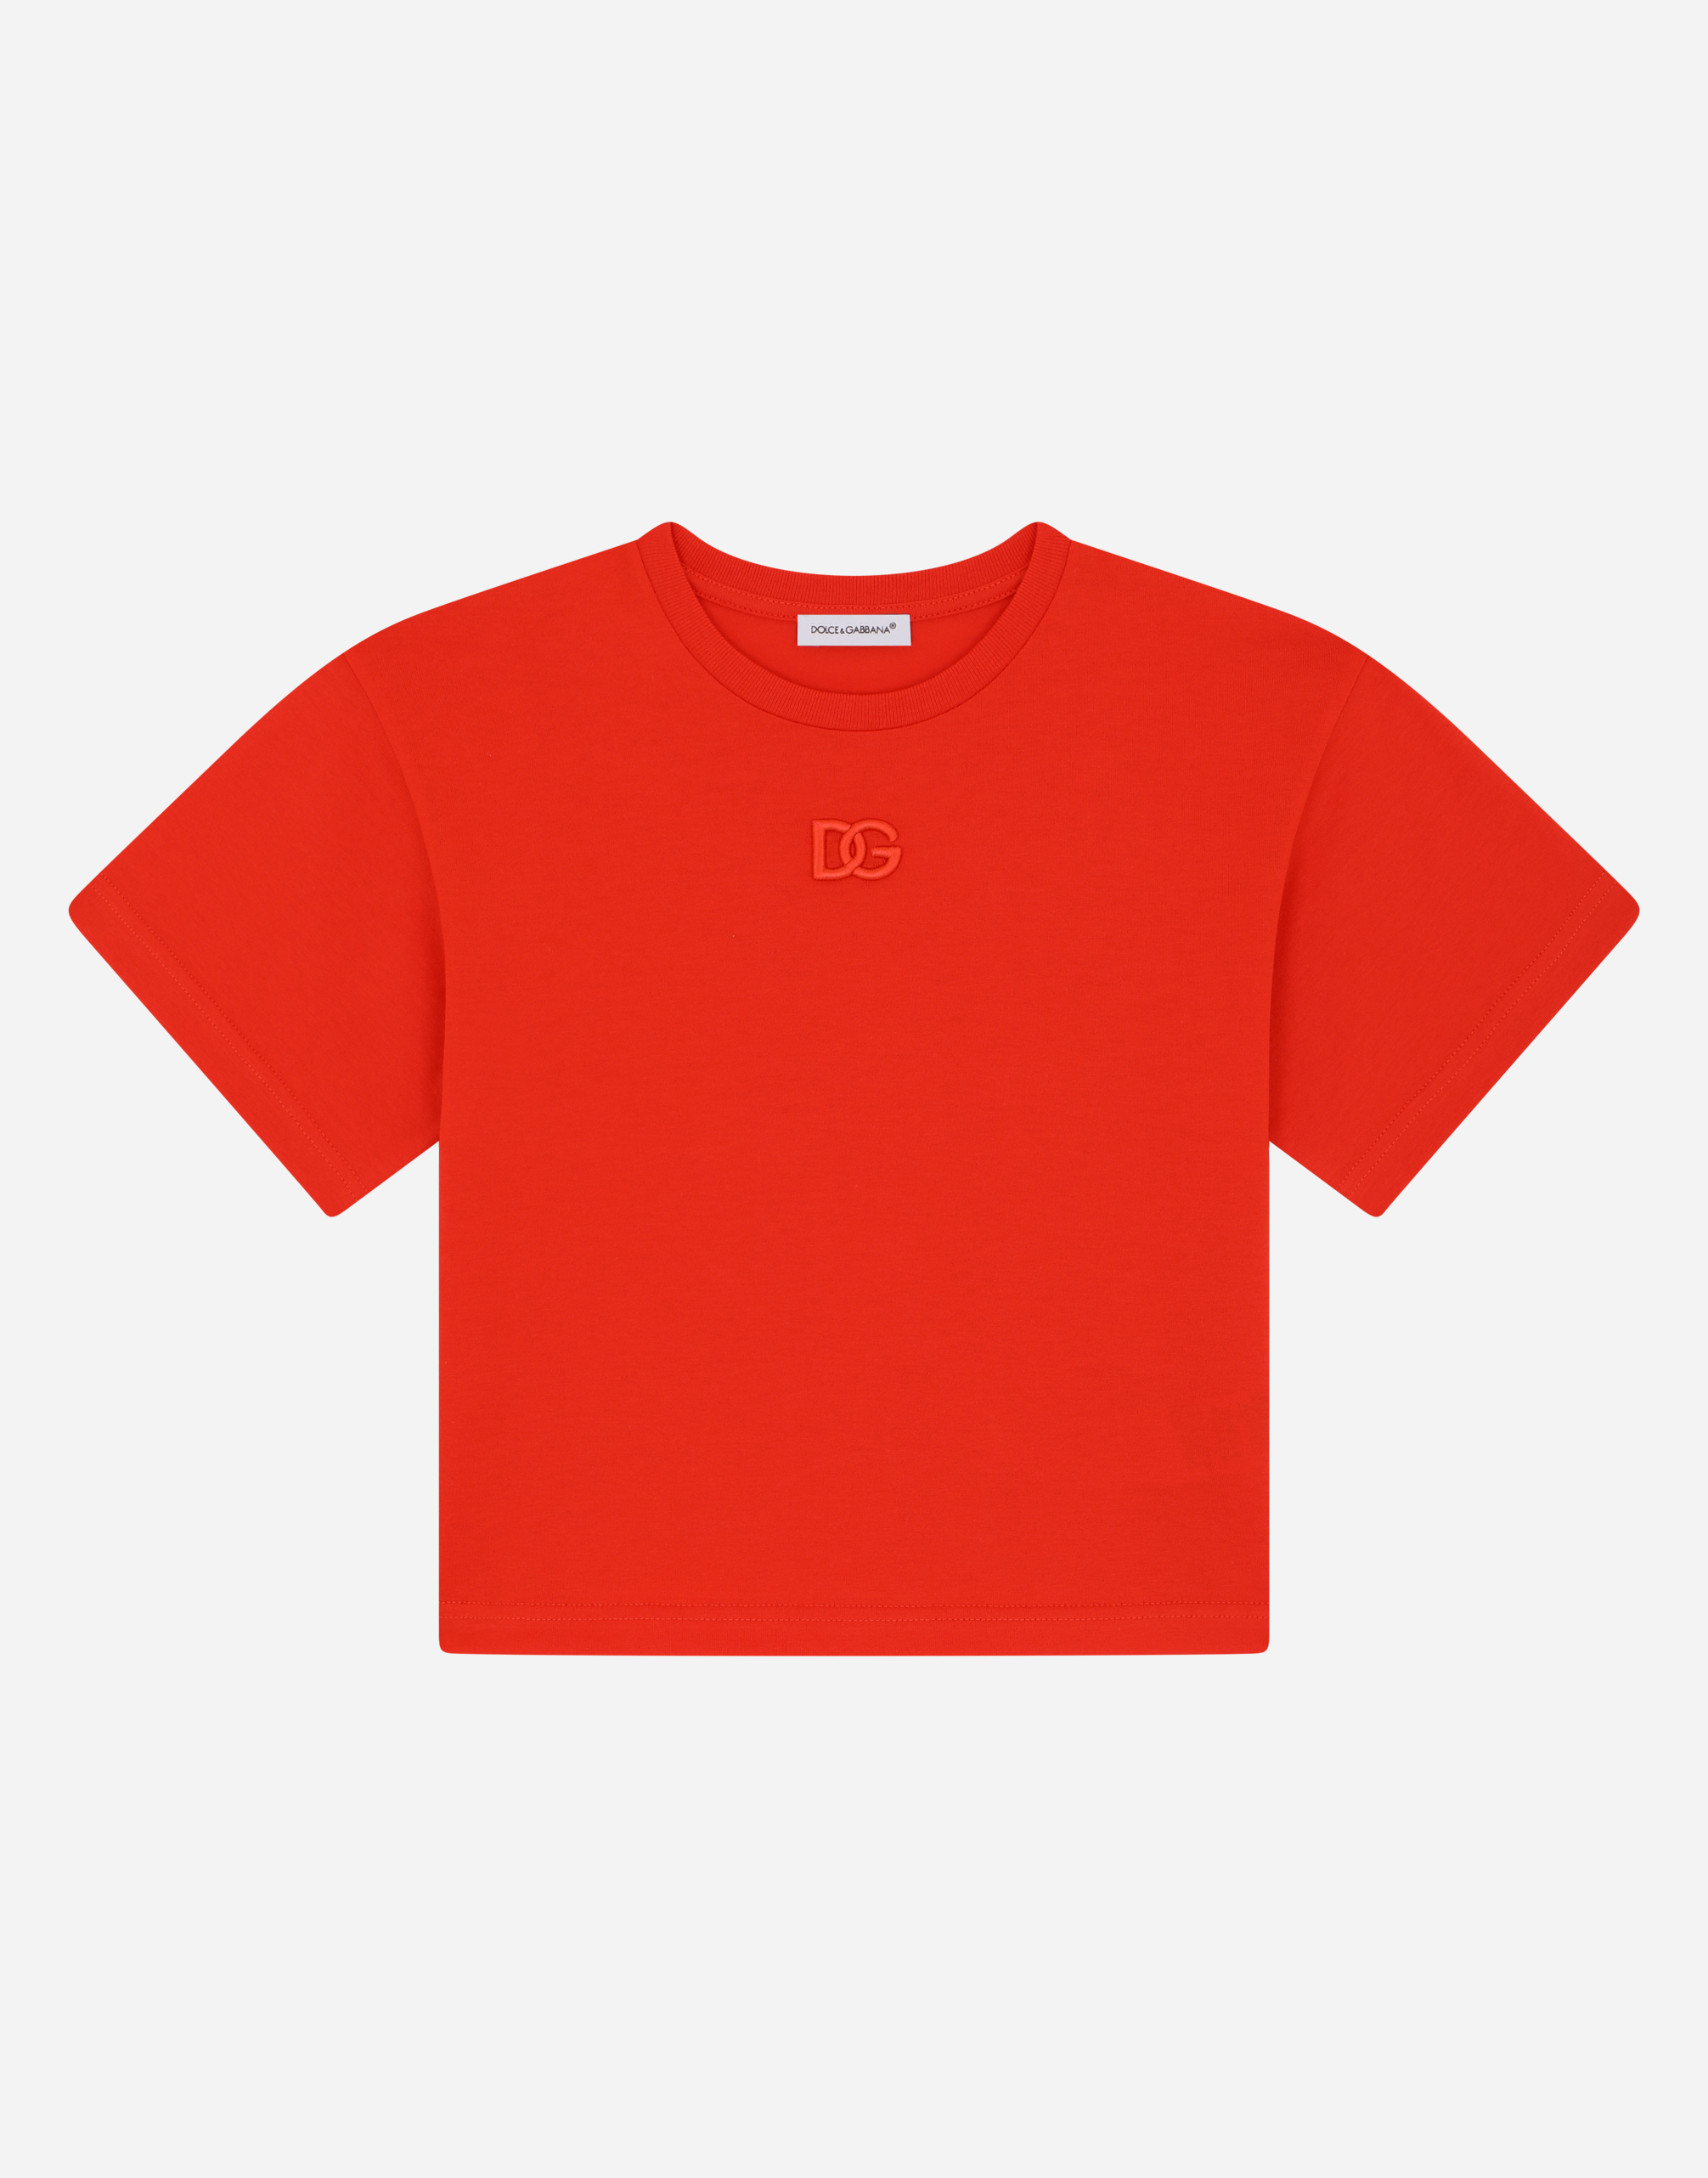 Jersey T-shirt with DG logo embroidery in Orange